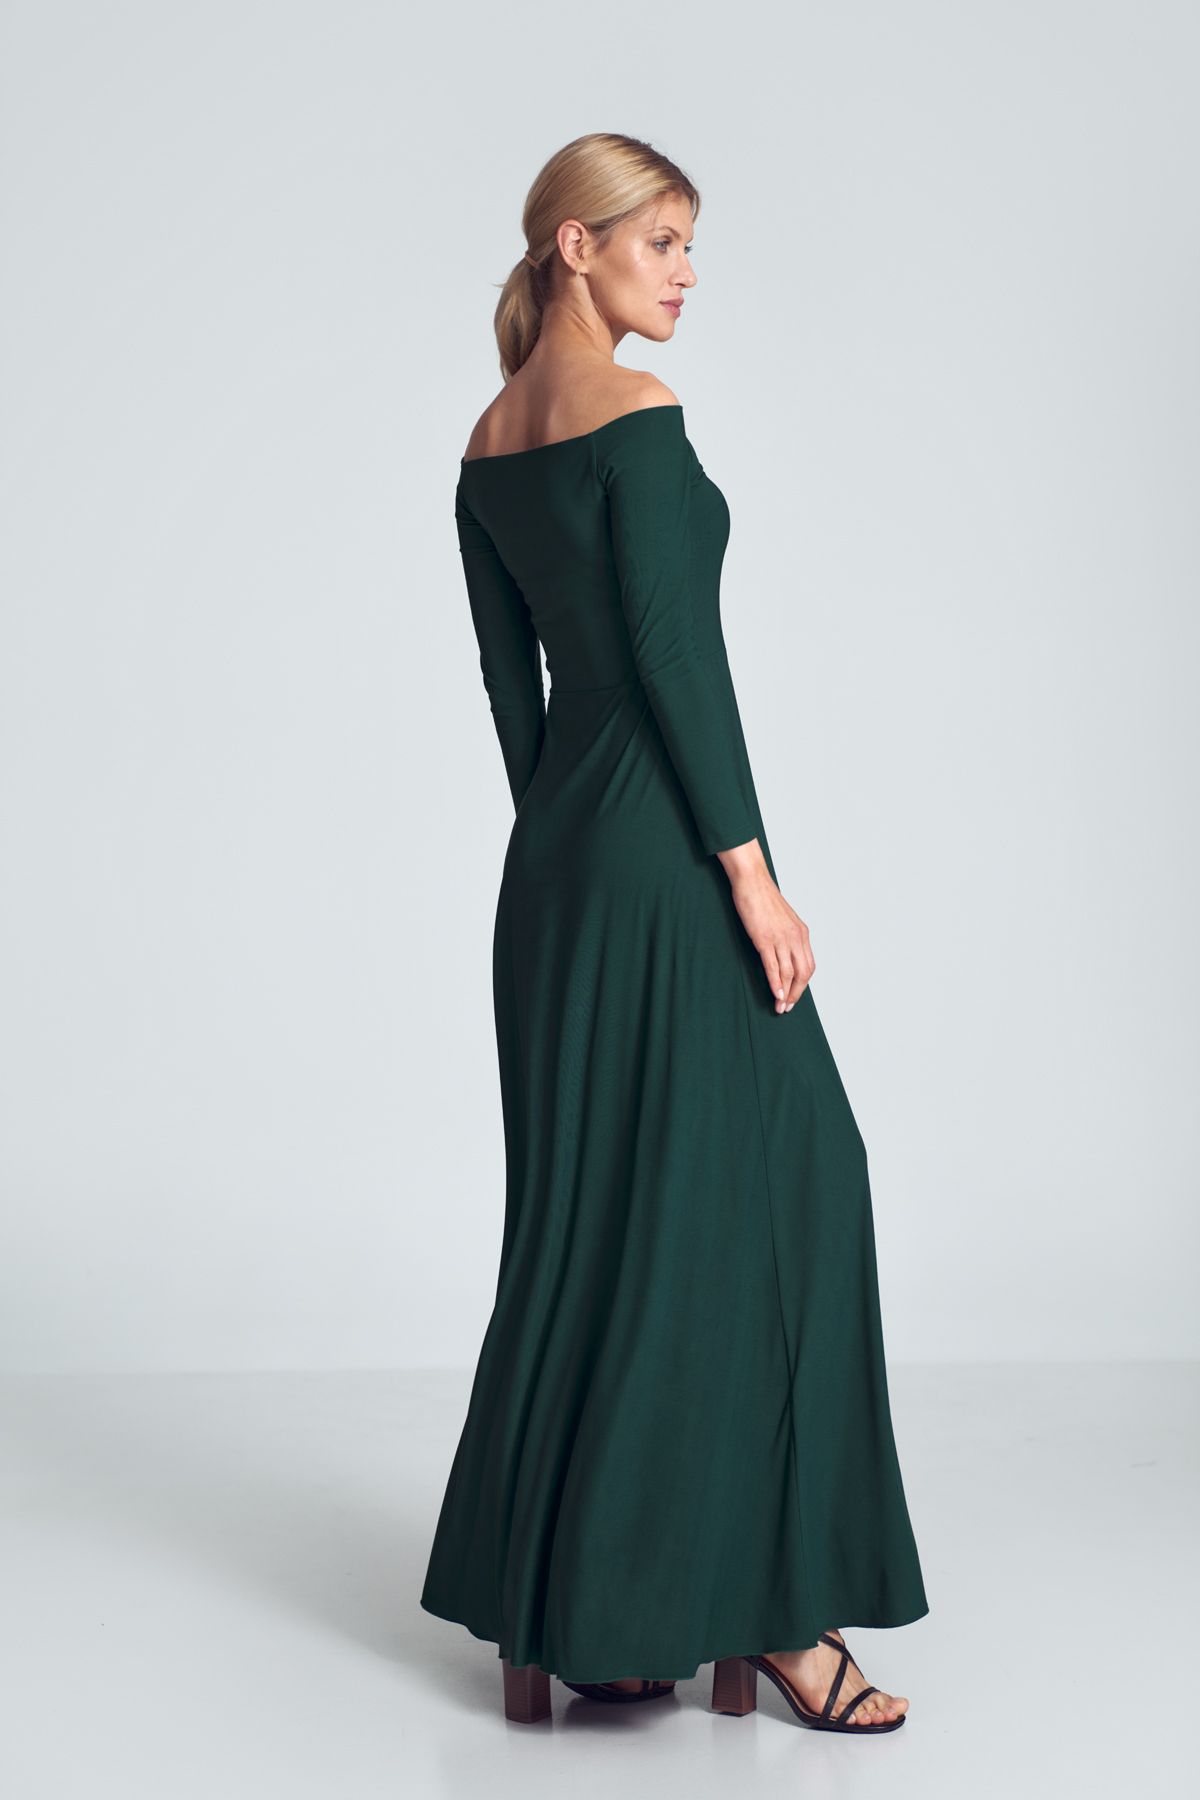 Green sensual maxi dress with long sleeves, large neckline - cold shoulders, pleats at the bust, sewn at the waist.